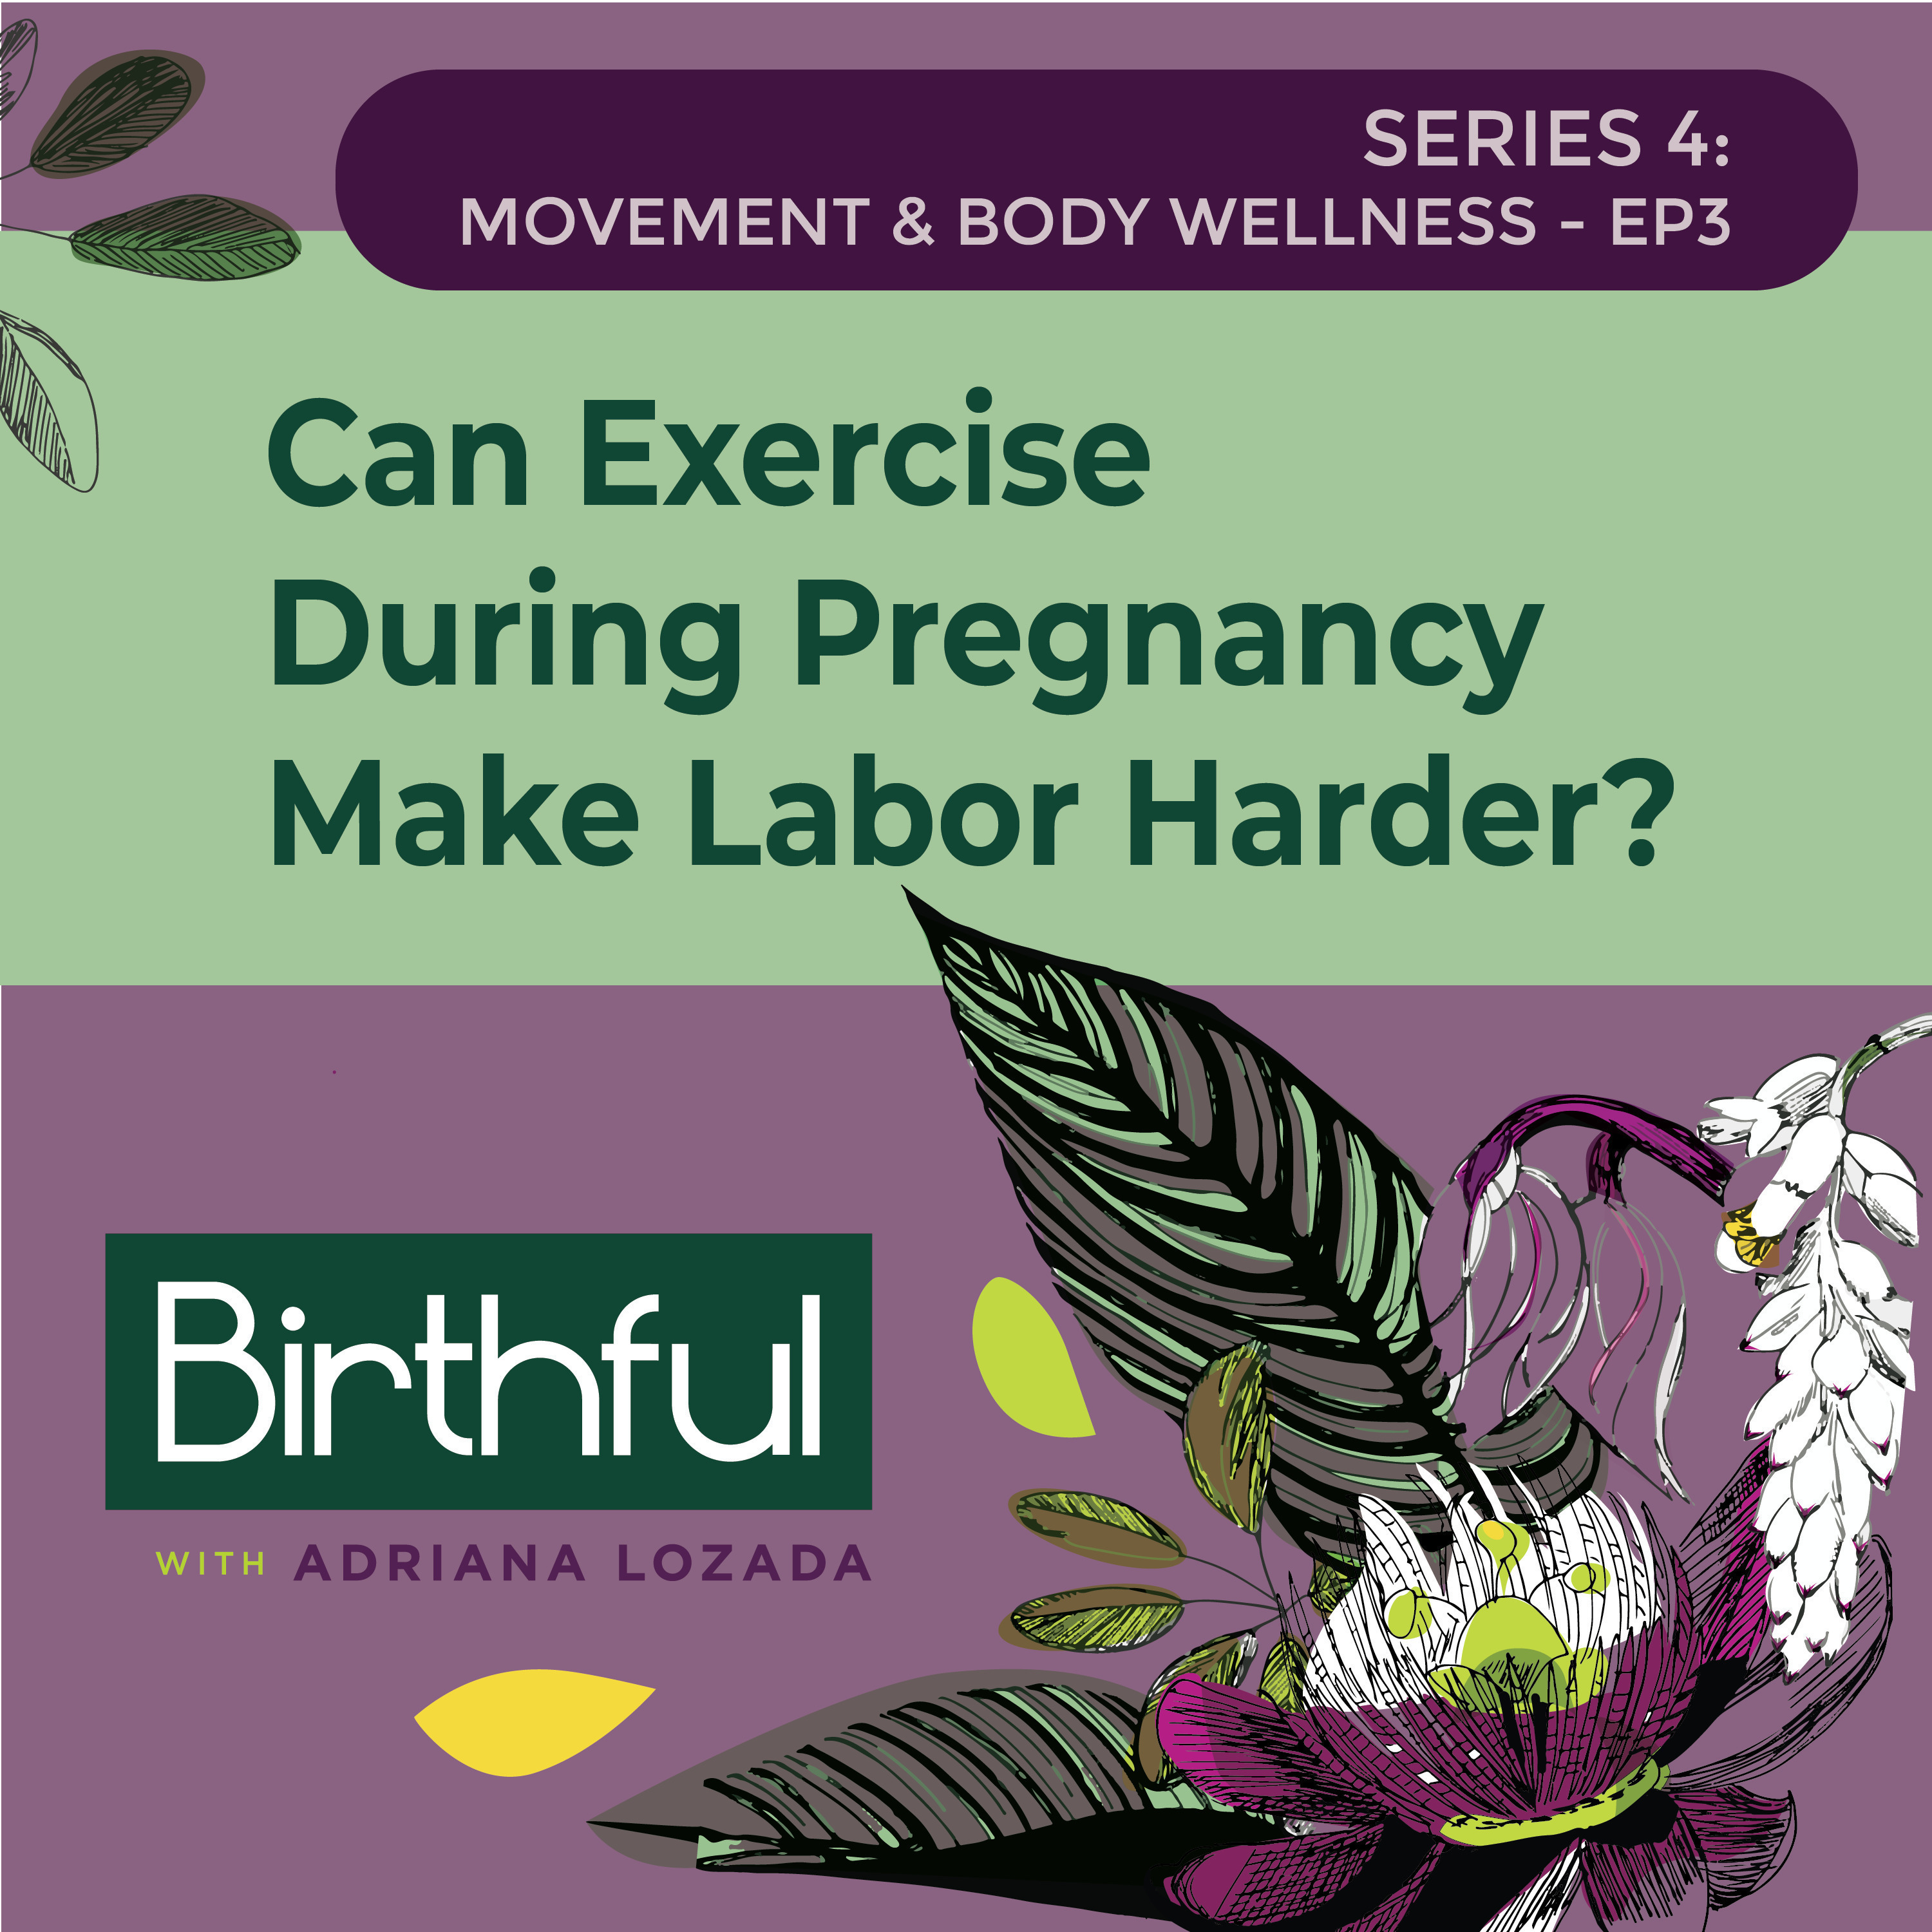 Can Exercise During Pregnancy Make Labor Harder?